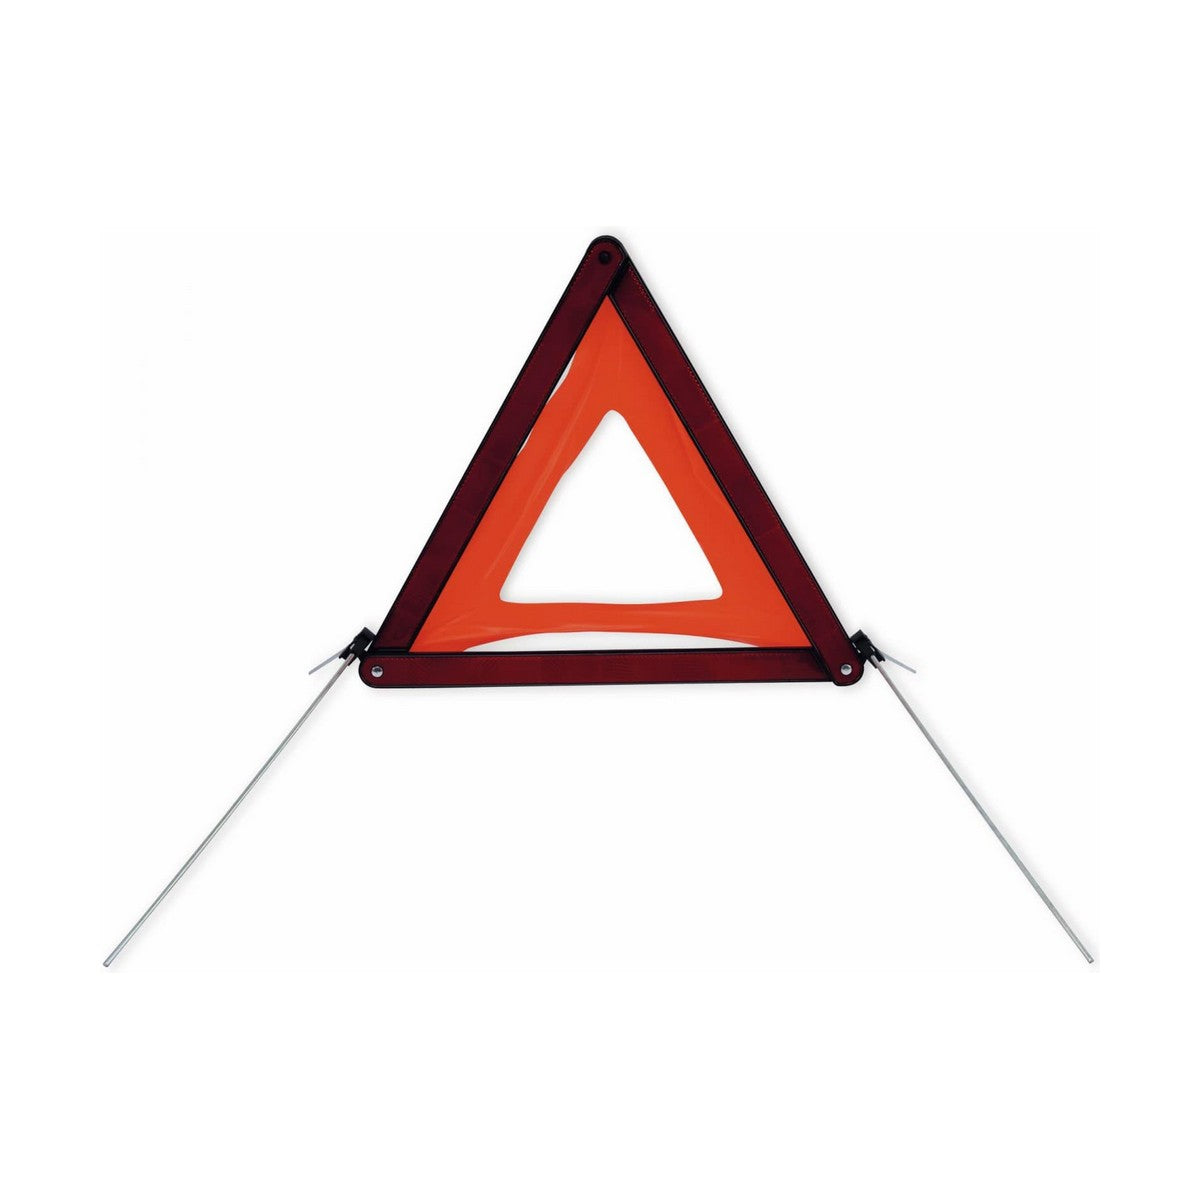 Approved Folding Emergency Triangle Dunlop 42 x 35 cm